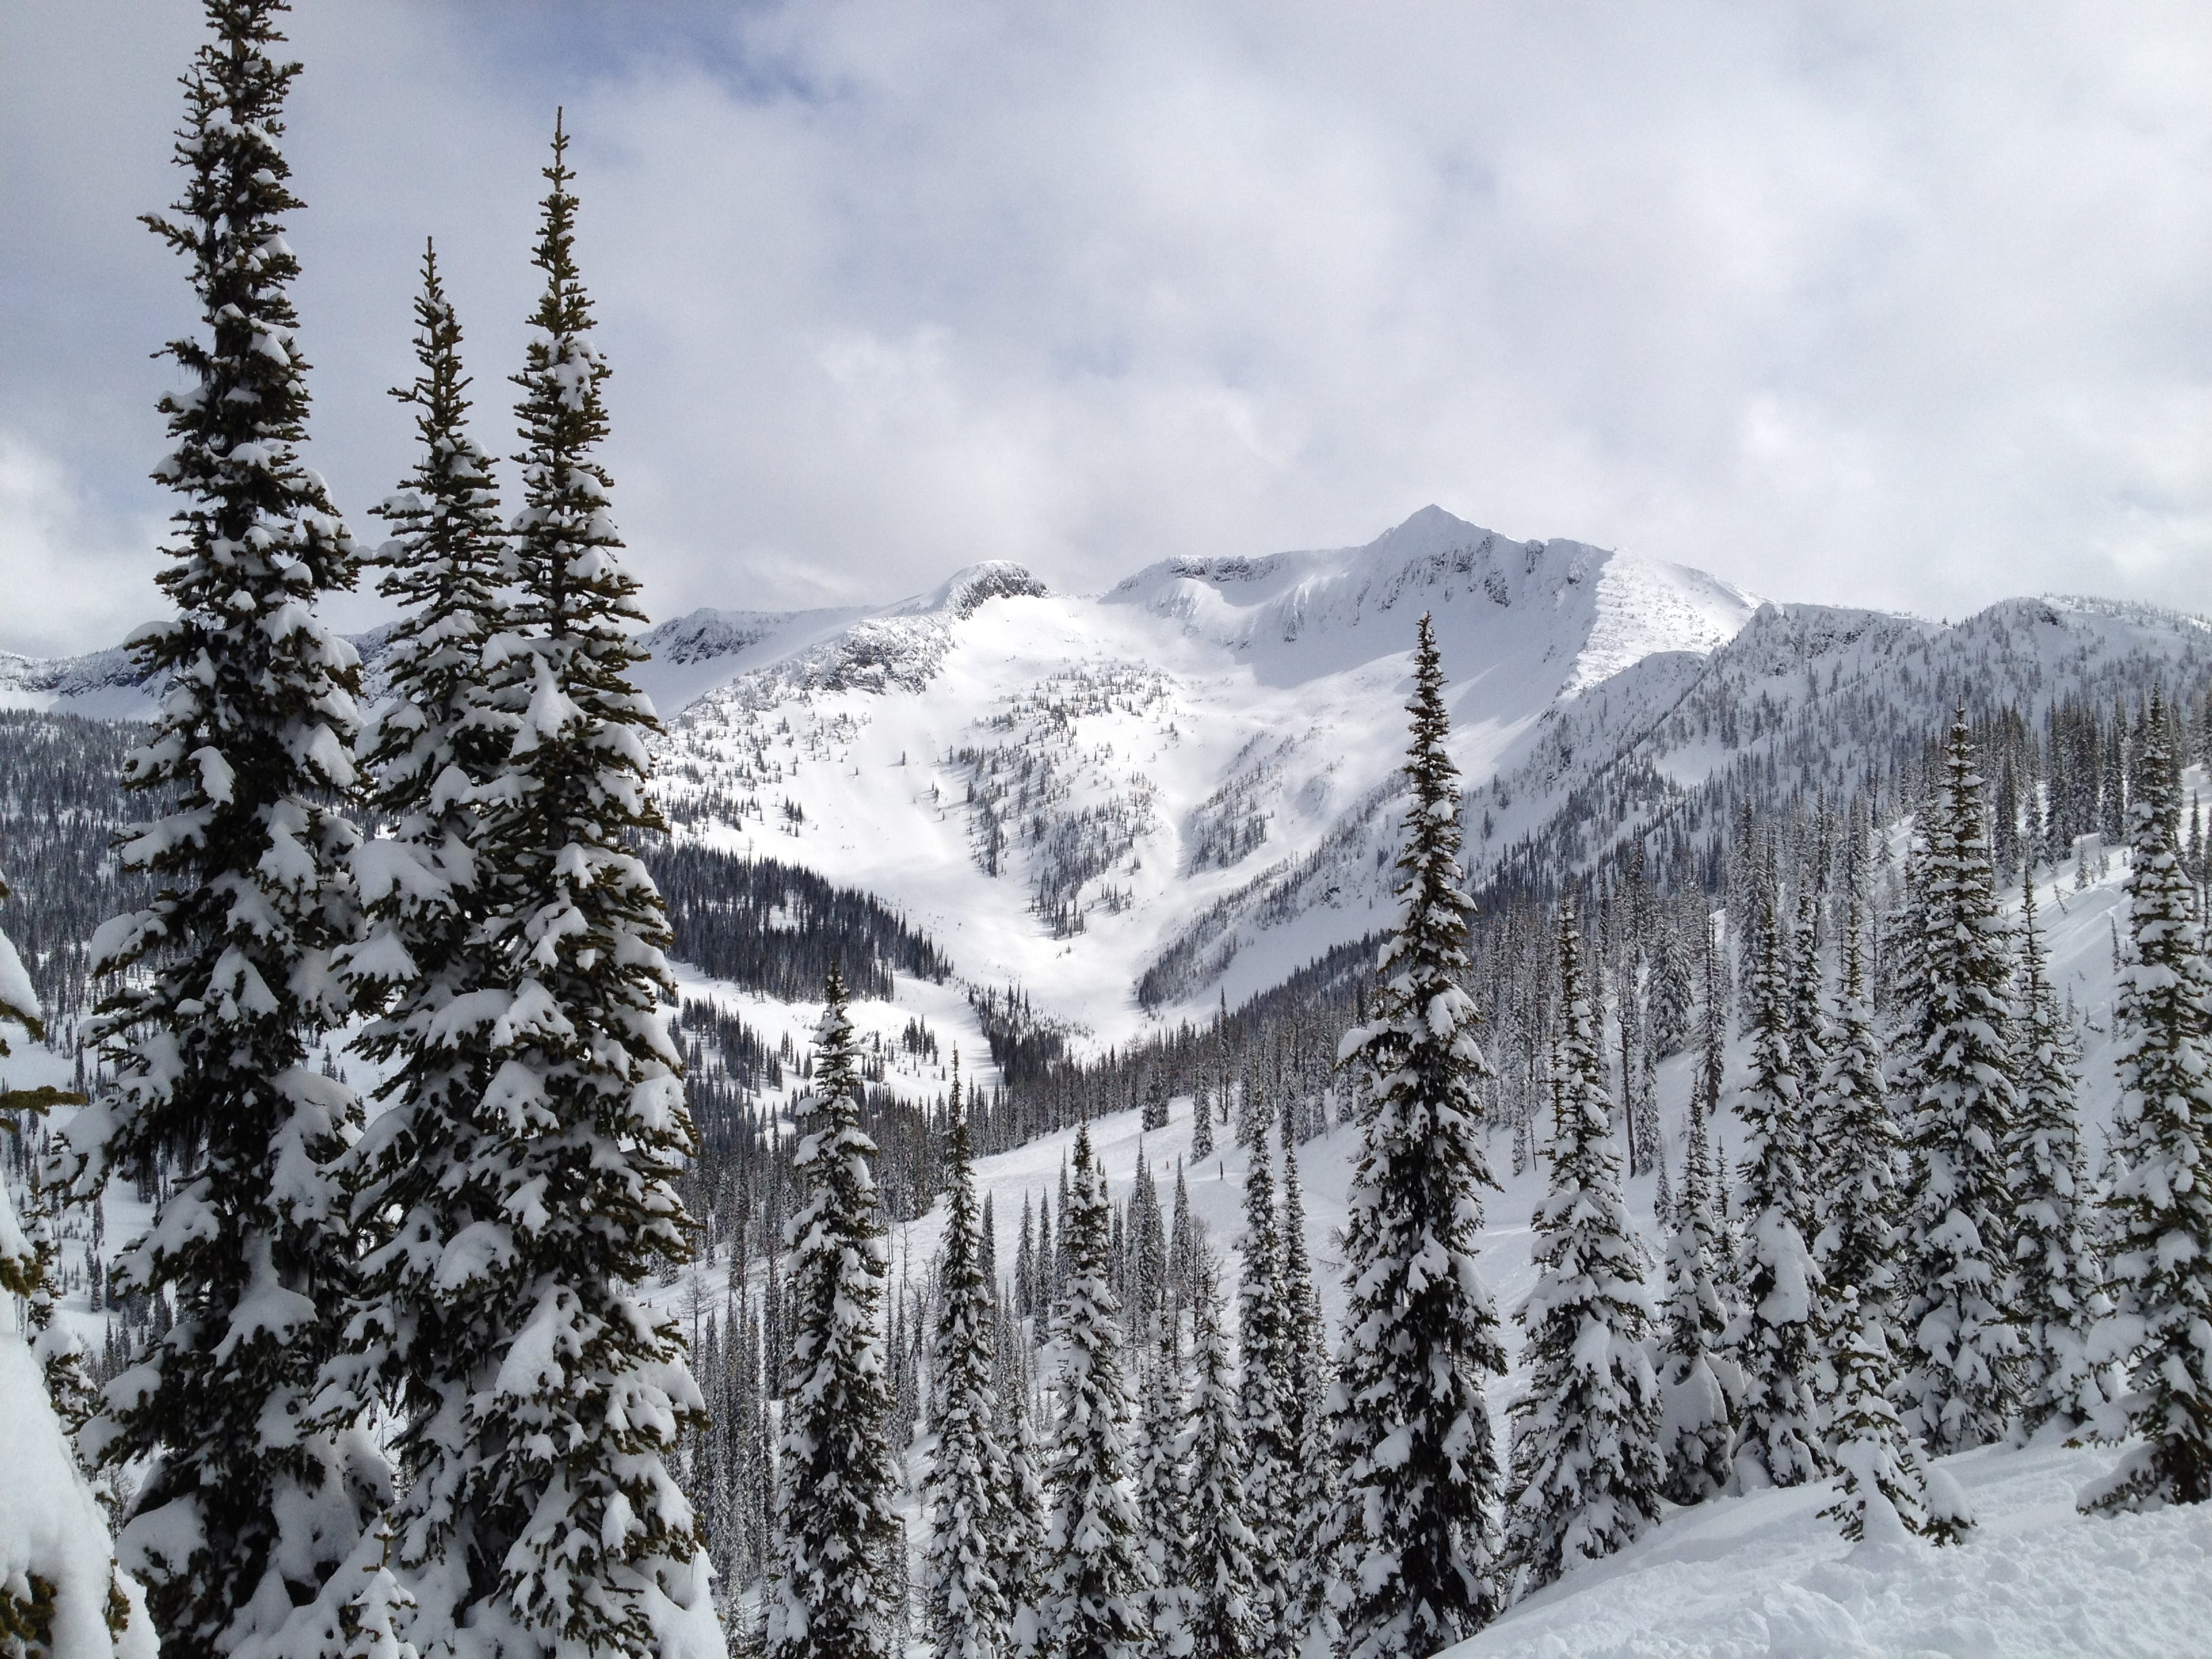 Backcountry Skier Rescued from Avalanche near Whitewater